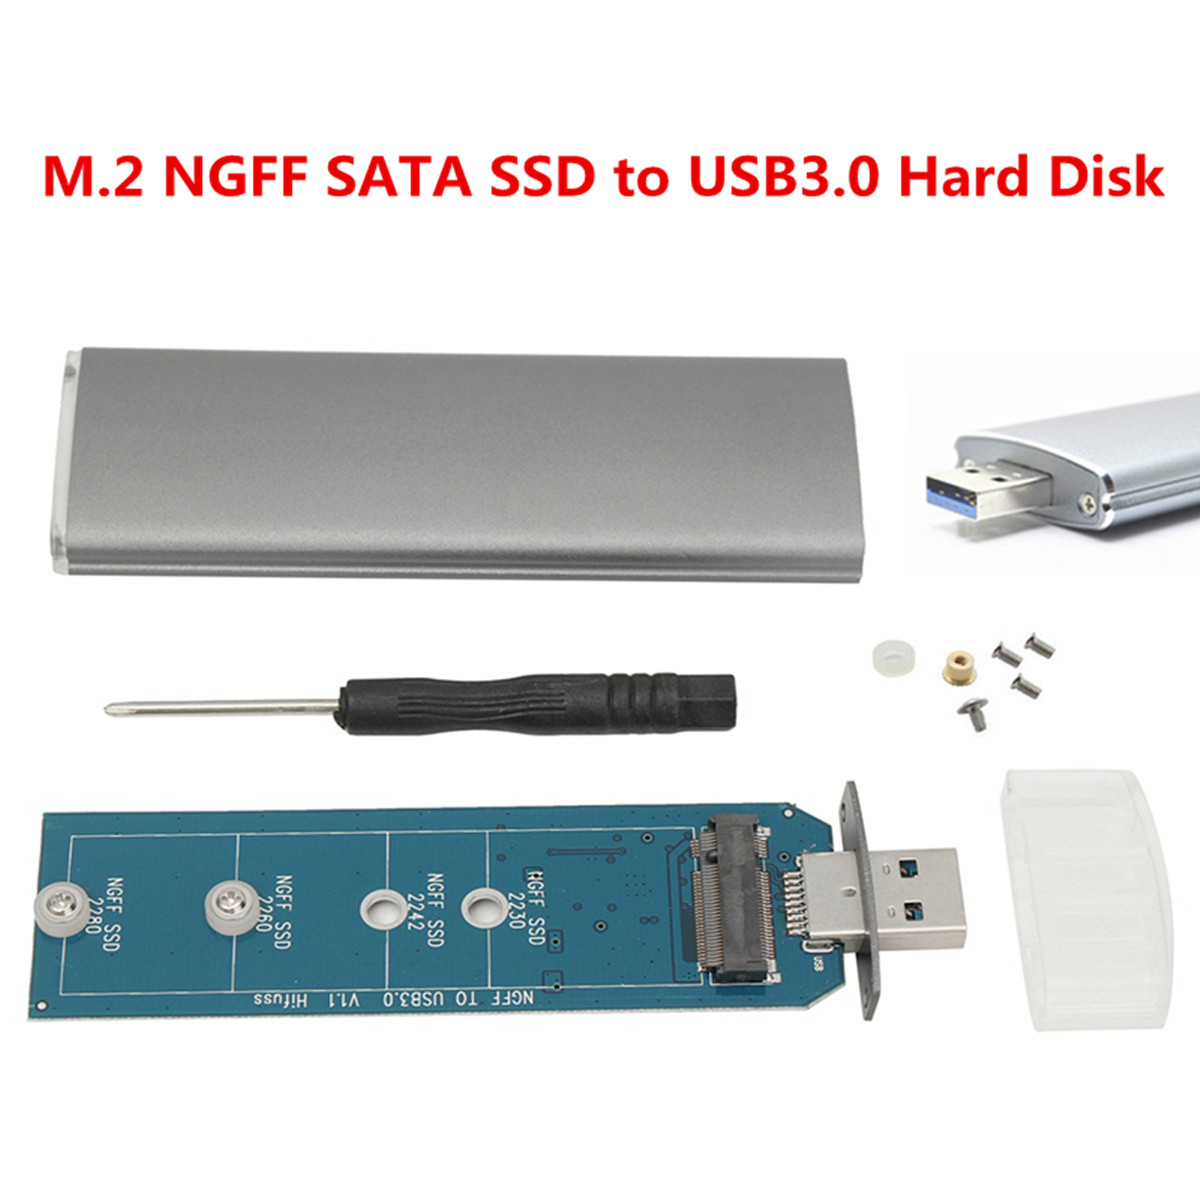 M.2 NGFF SSD SATA to USB 3.0 Converter Adapter External Enclosure Mobile SSD Case 122